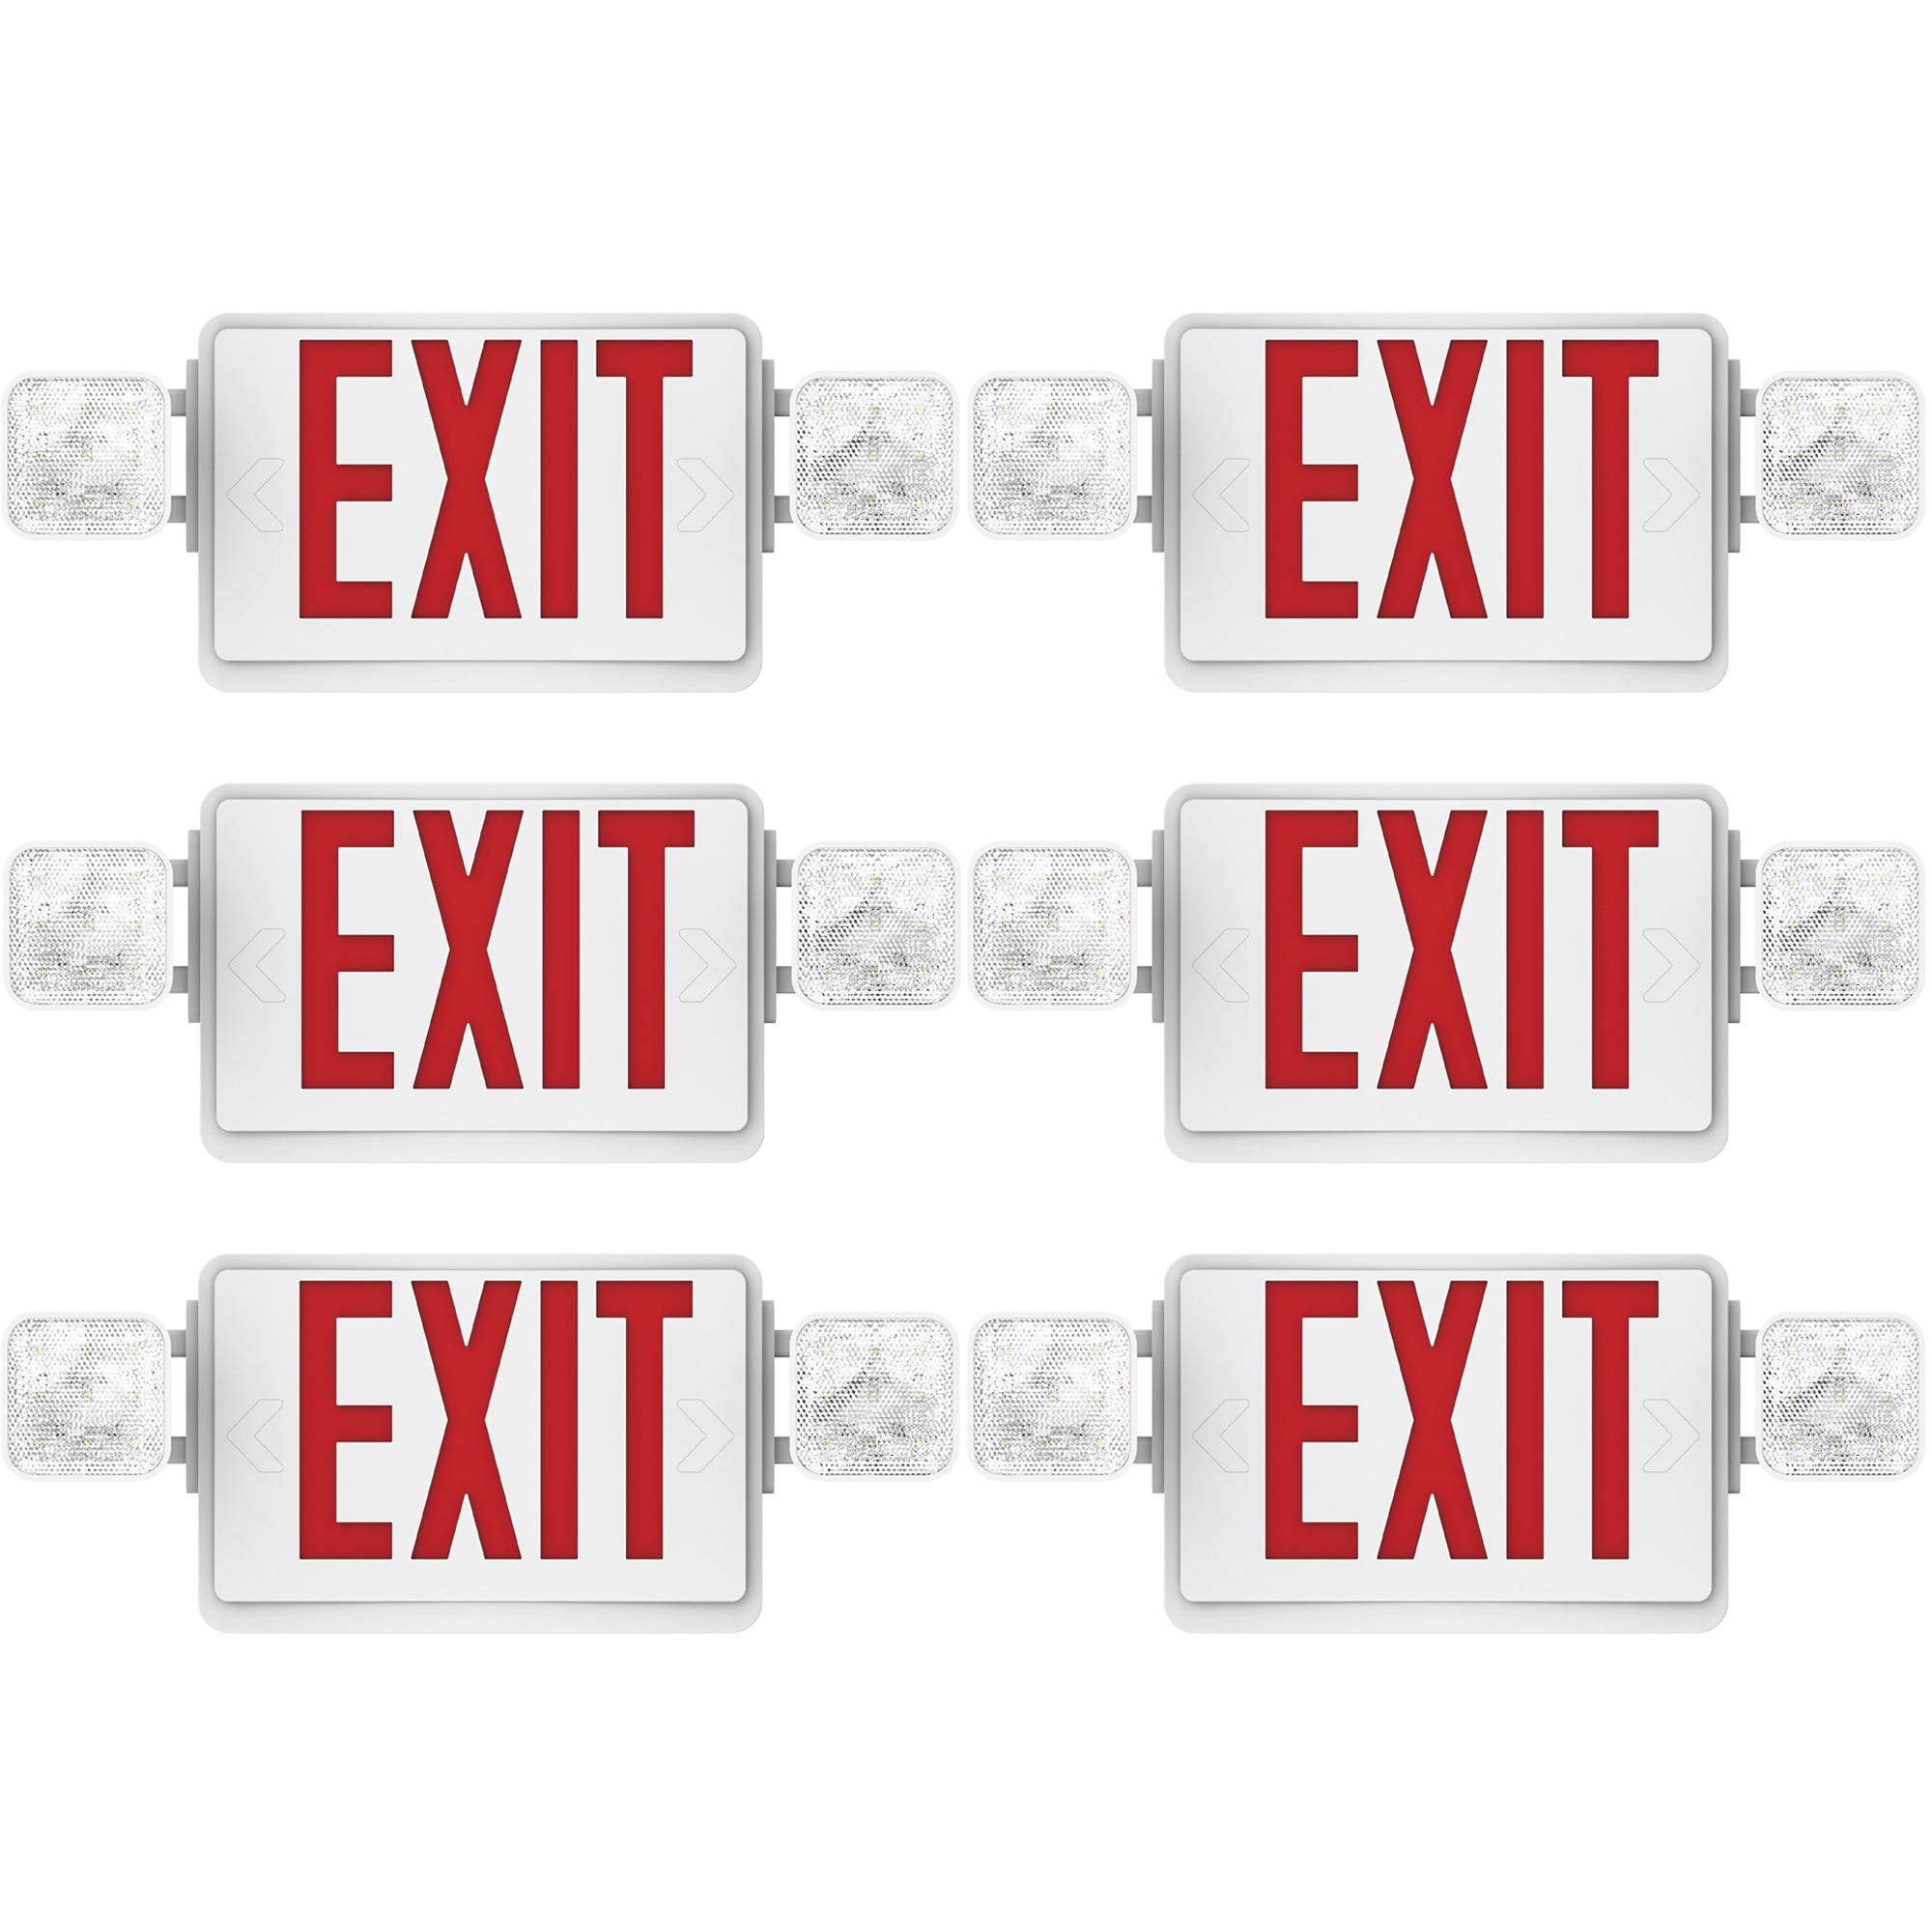 2 Head LED Exit Sign (Red), Floodlight